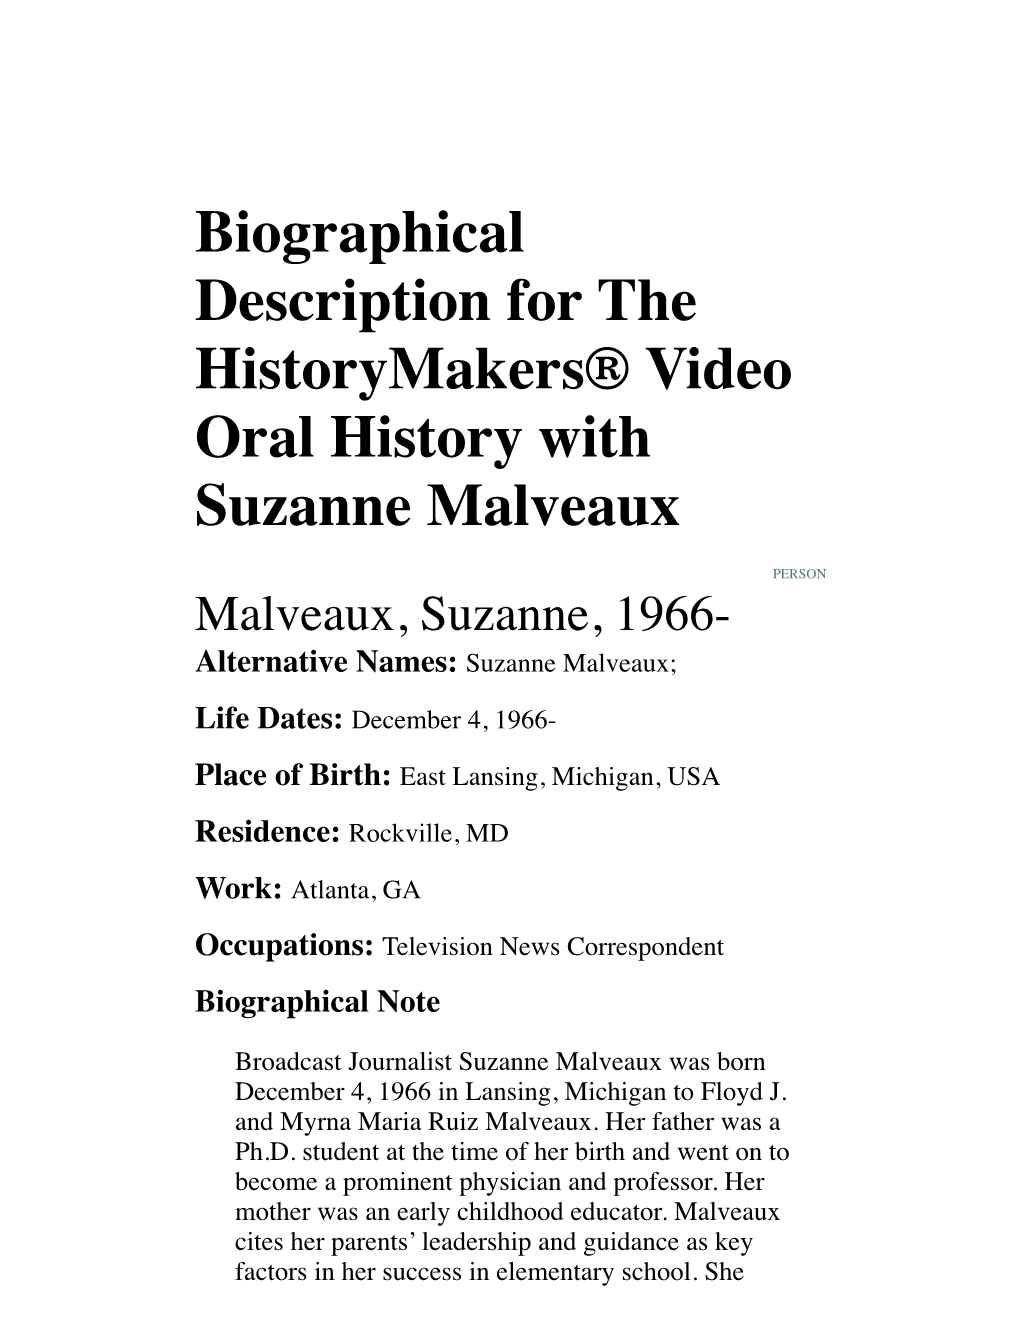 Biographical Description for the Historymakers® Video Oral History with Suzanne Malveaux